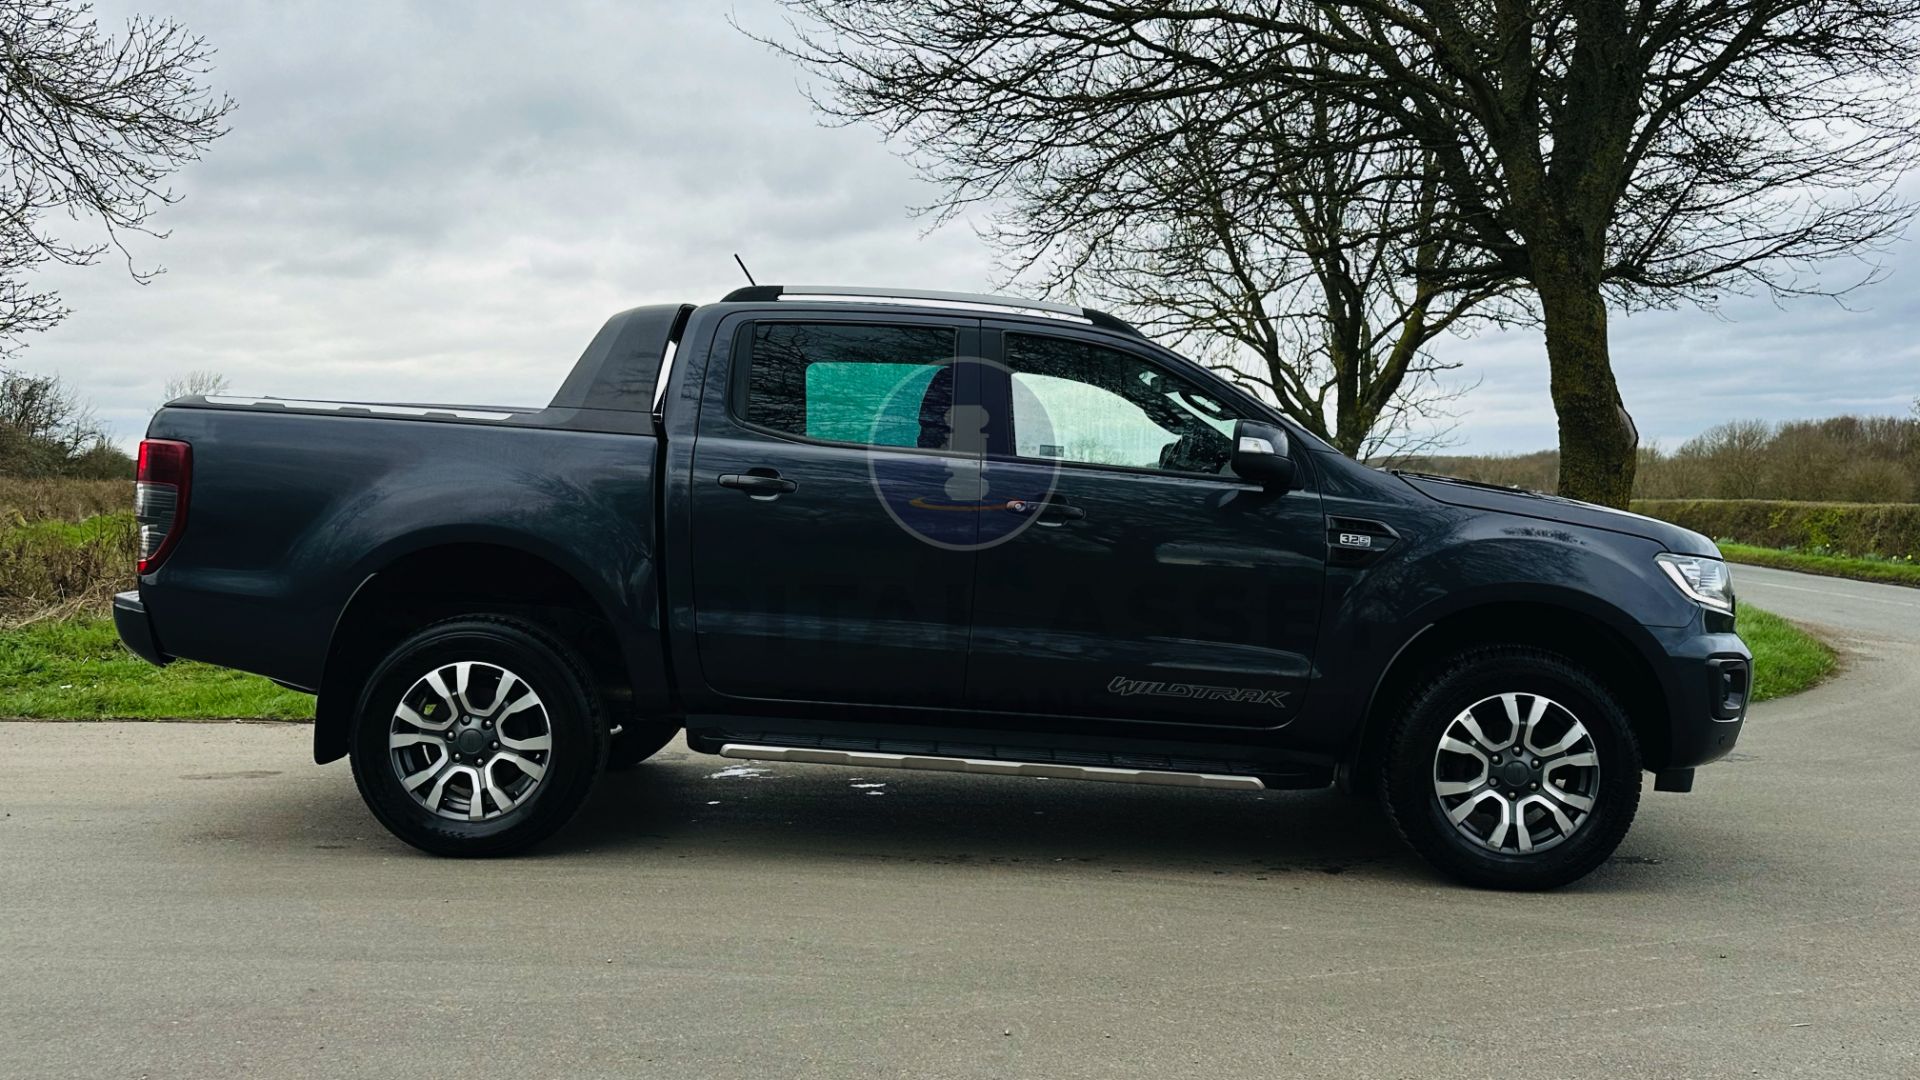 (On Sale) FORD RANGER *WILDTRAK EDITION* DOUBLE CAB PICK-UP (69 REG - EURO 6) 3.2 TDCI - AUTOMATIC - Image 14 of 49